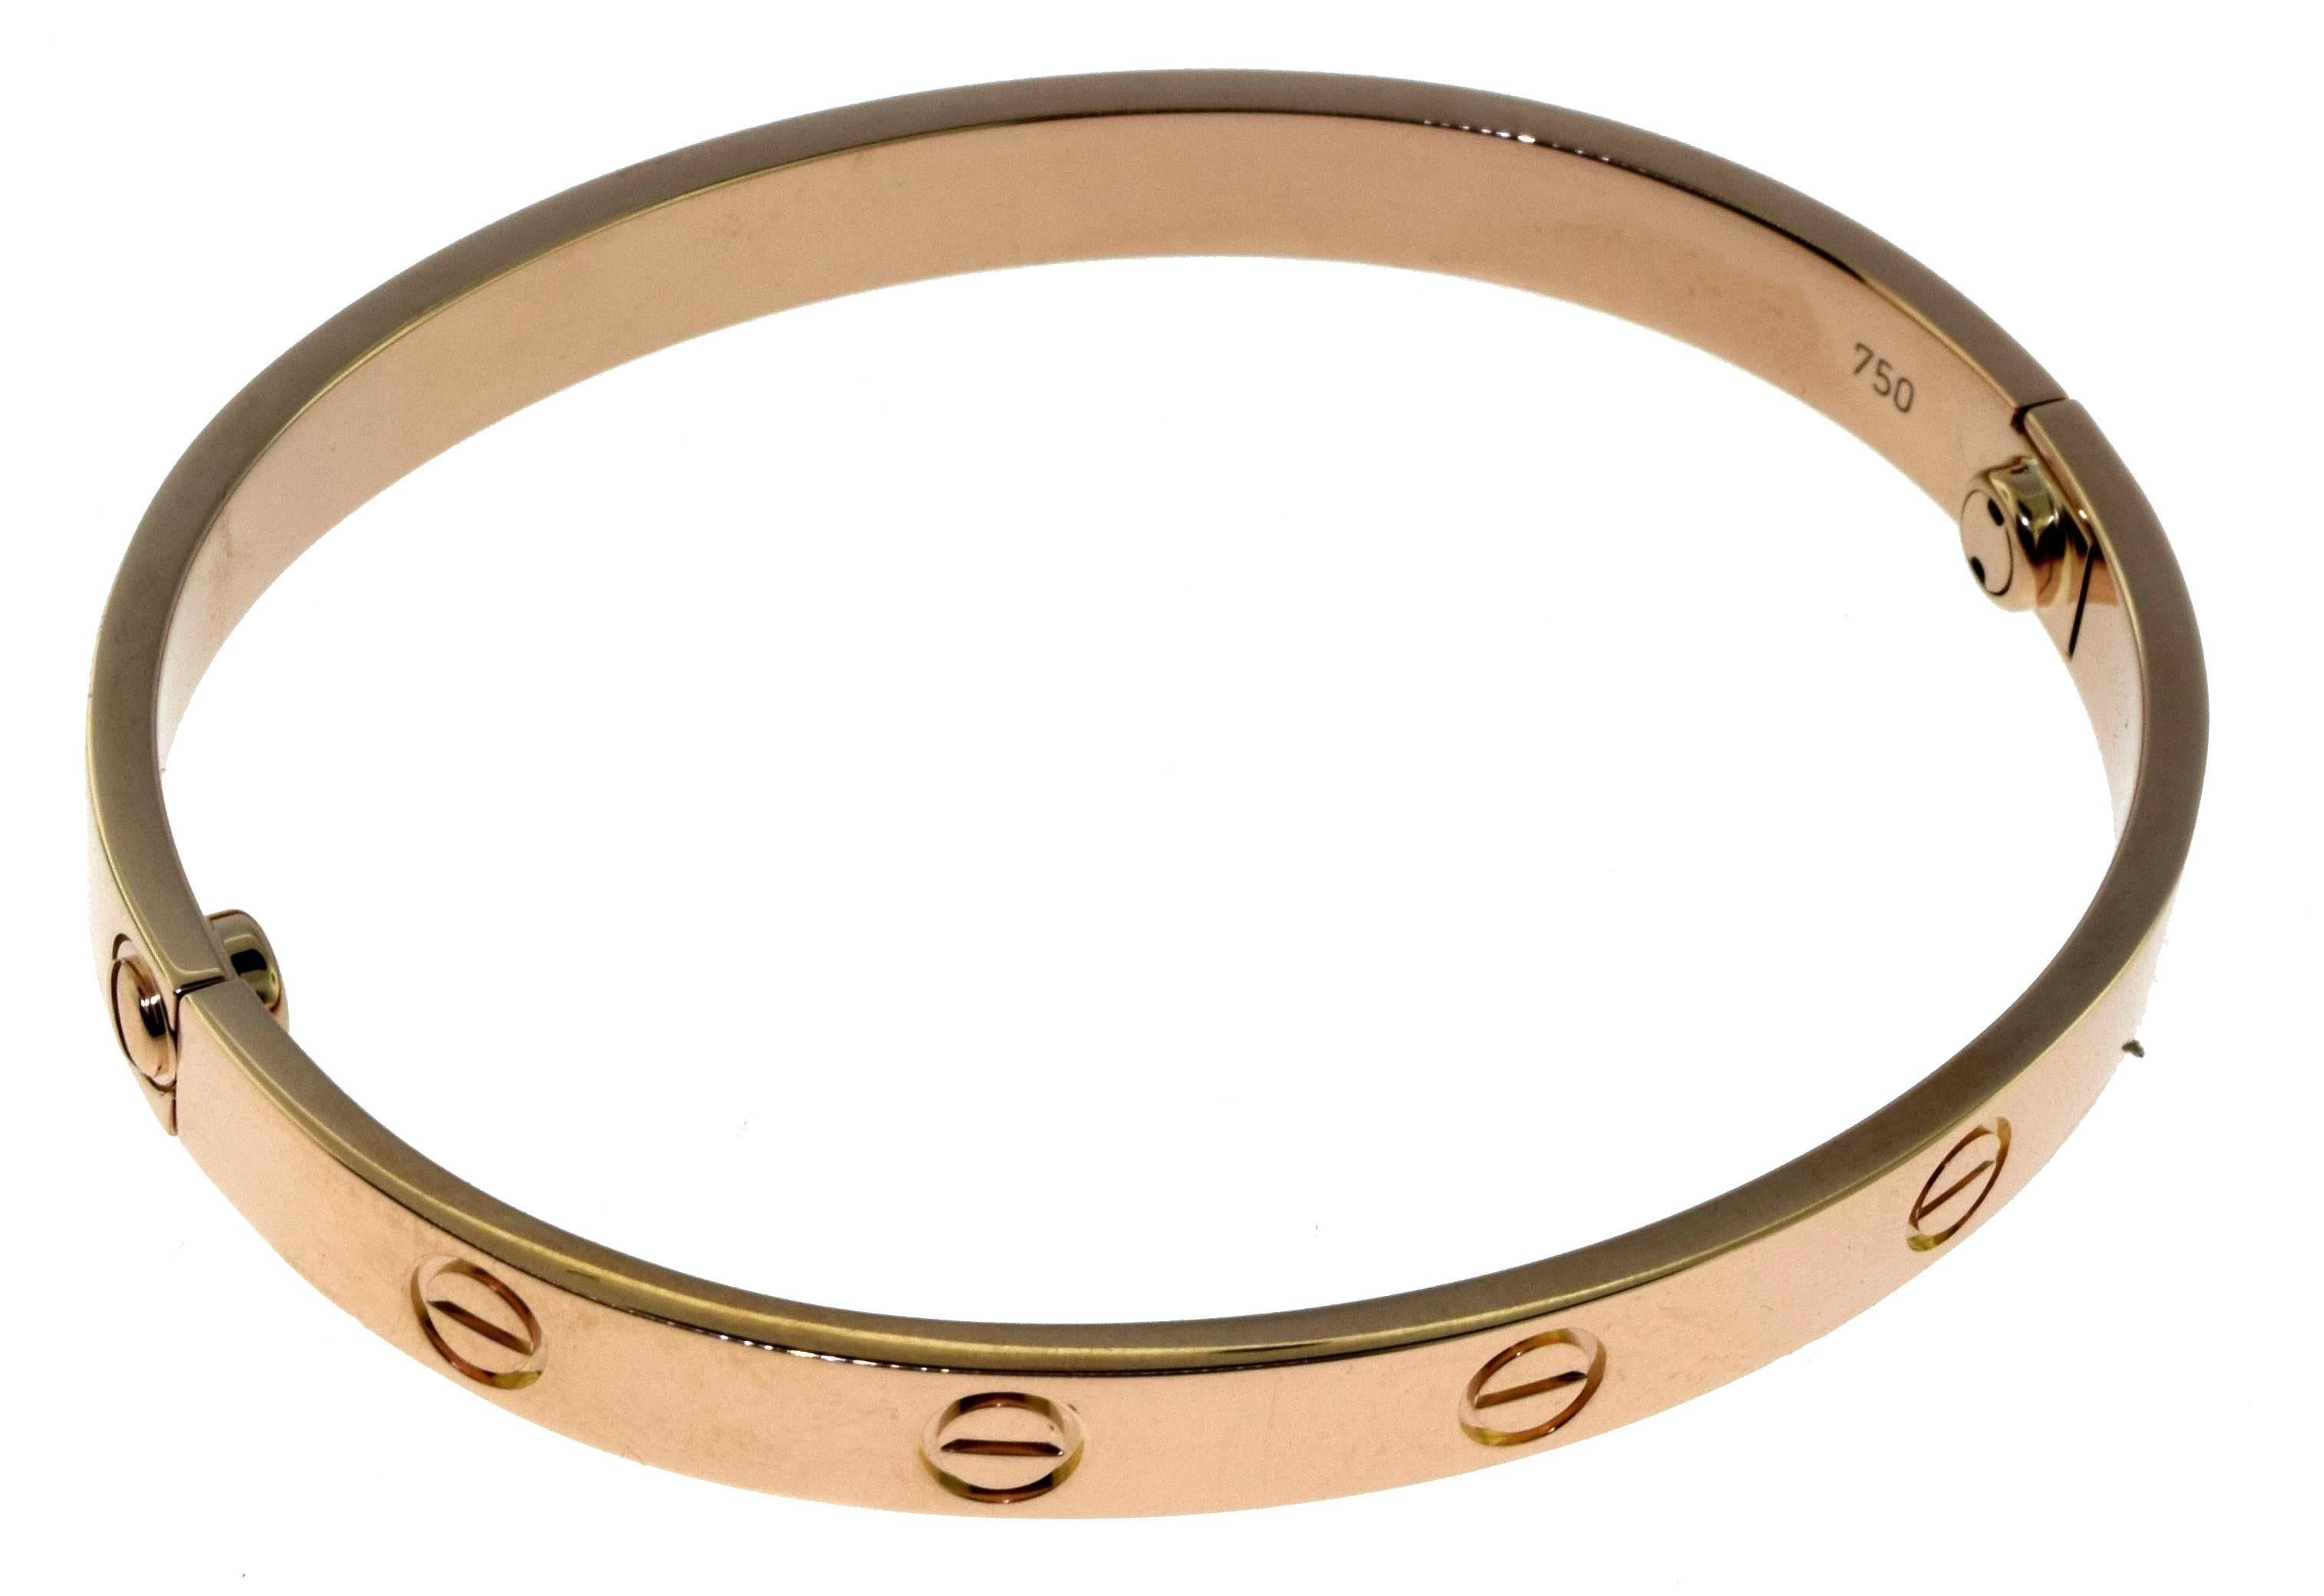 From Cartier's LOVE Collection:

Bracelet Size: 17 = 17 cm (fits anywhere between a 6.3 - 6.9 inch wrist)
Metal: 18k Rose Gold
Total Item Weight (g): 31.4
Collateral: Cartier Invoice, Manufacturer's Box, Cert. of Authenticity

Hallmark: Cartier,